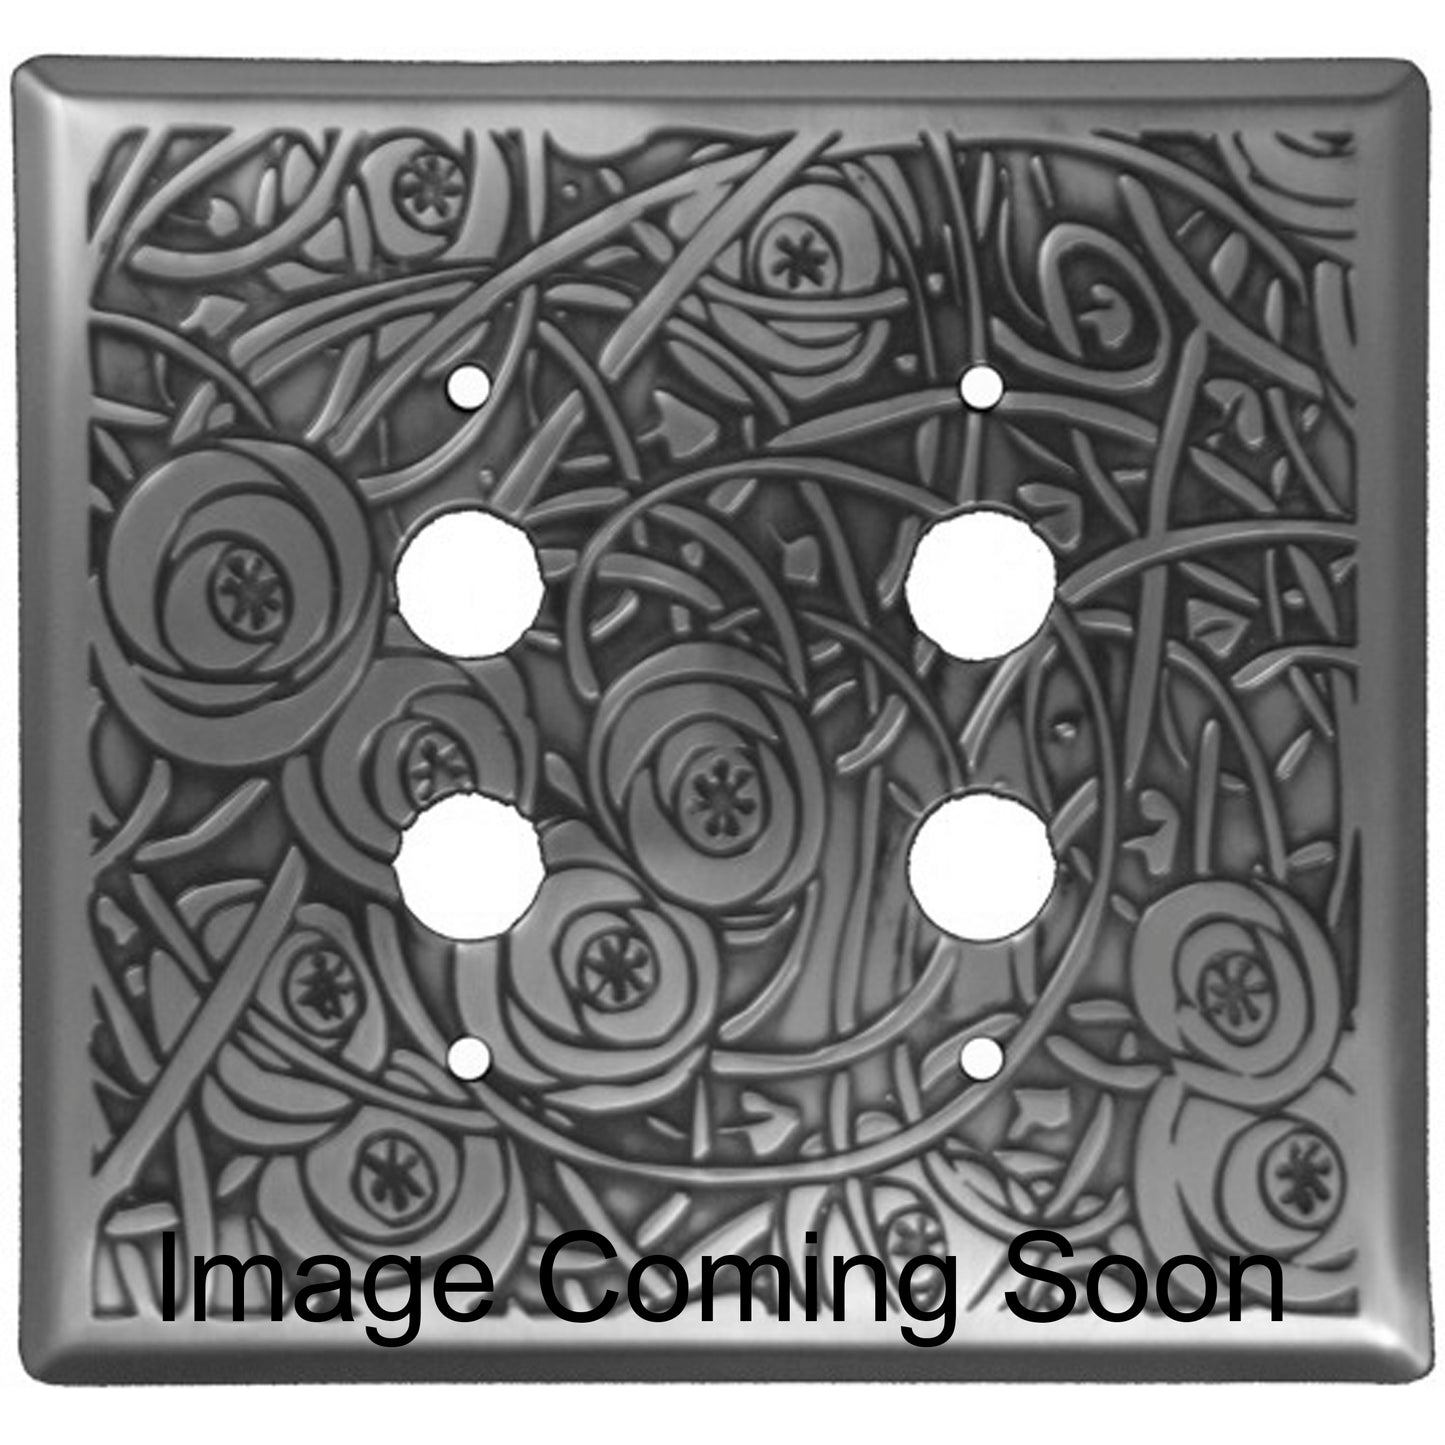 Deco Floral Oil Rubbed Copper 2 PushbuttonSwitchplate:Wallplatesonline.com